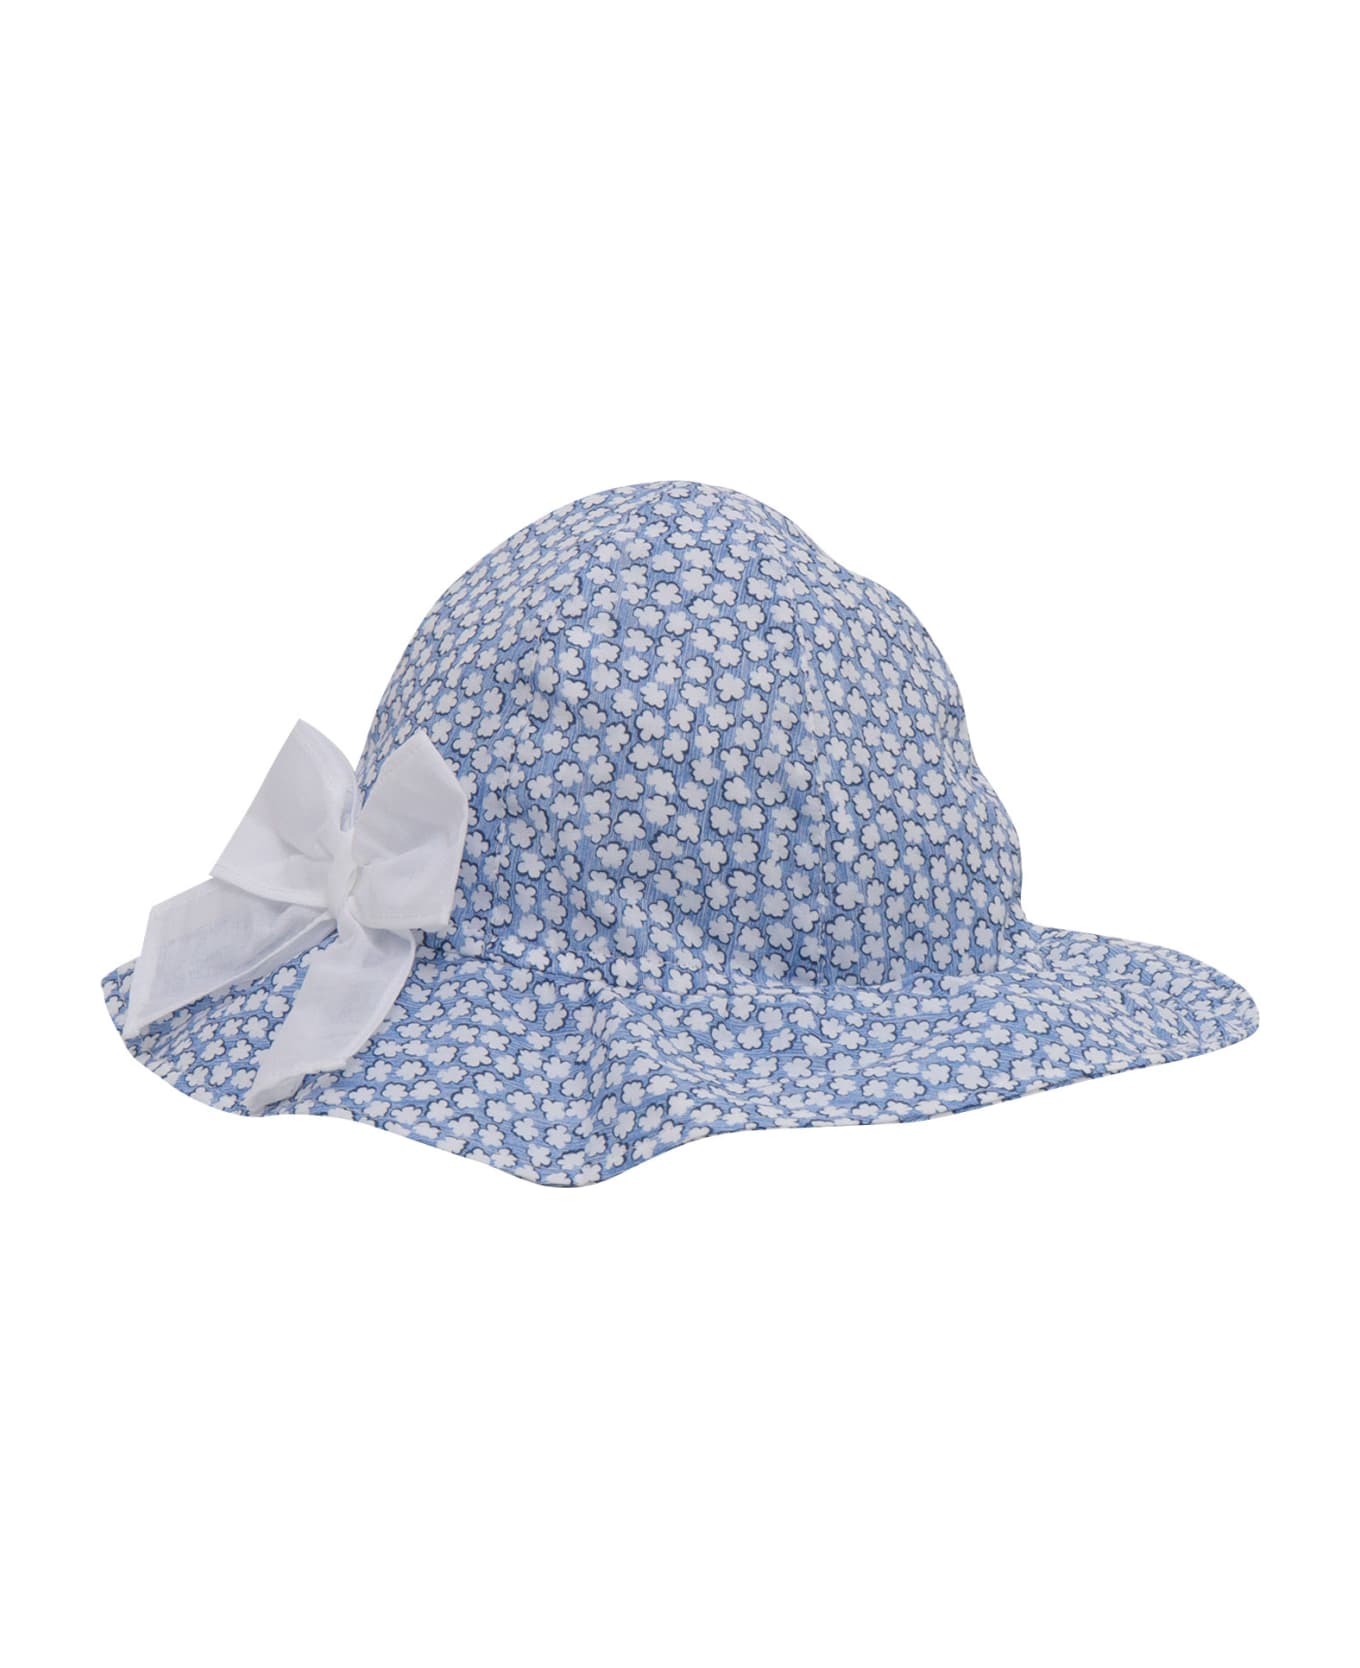 Il Gufo Light Blu Hat With Bow - BLUE アクセサリー＆ギフト